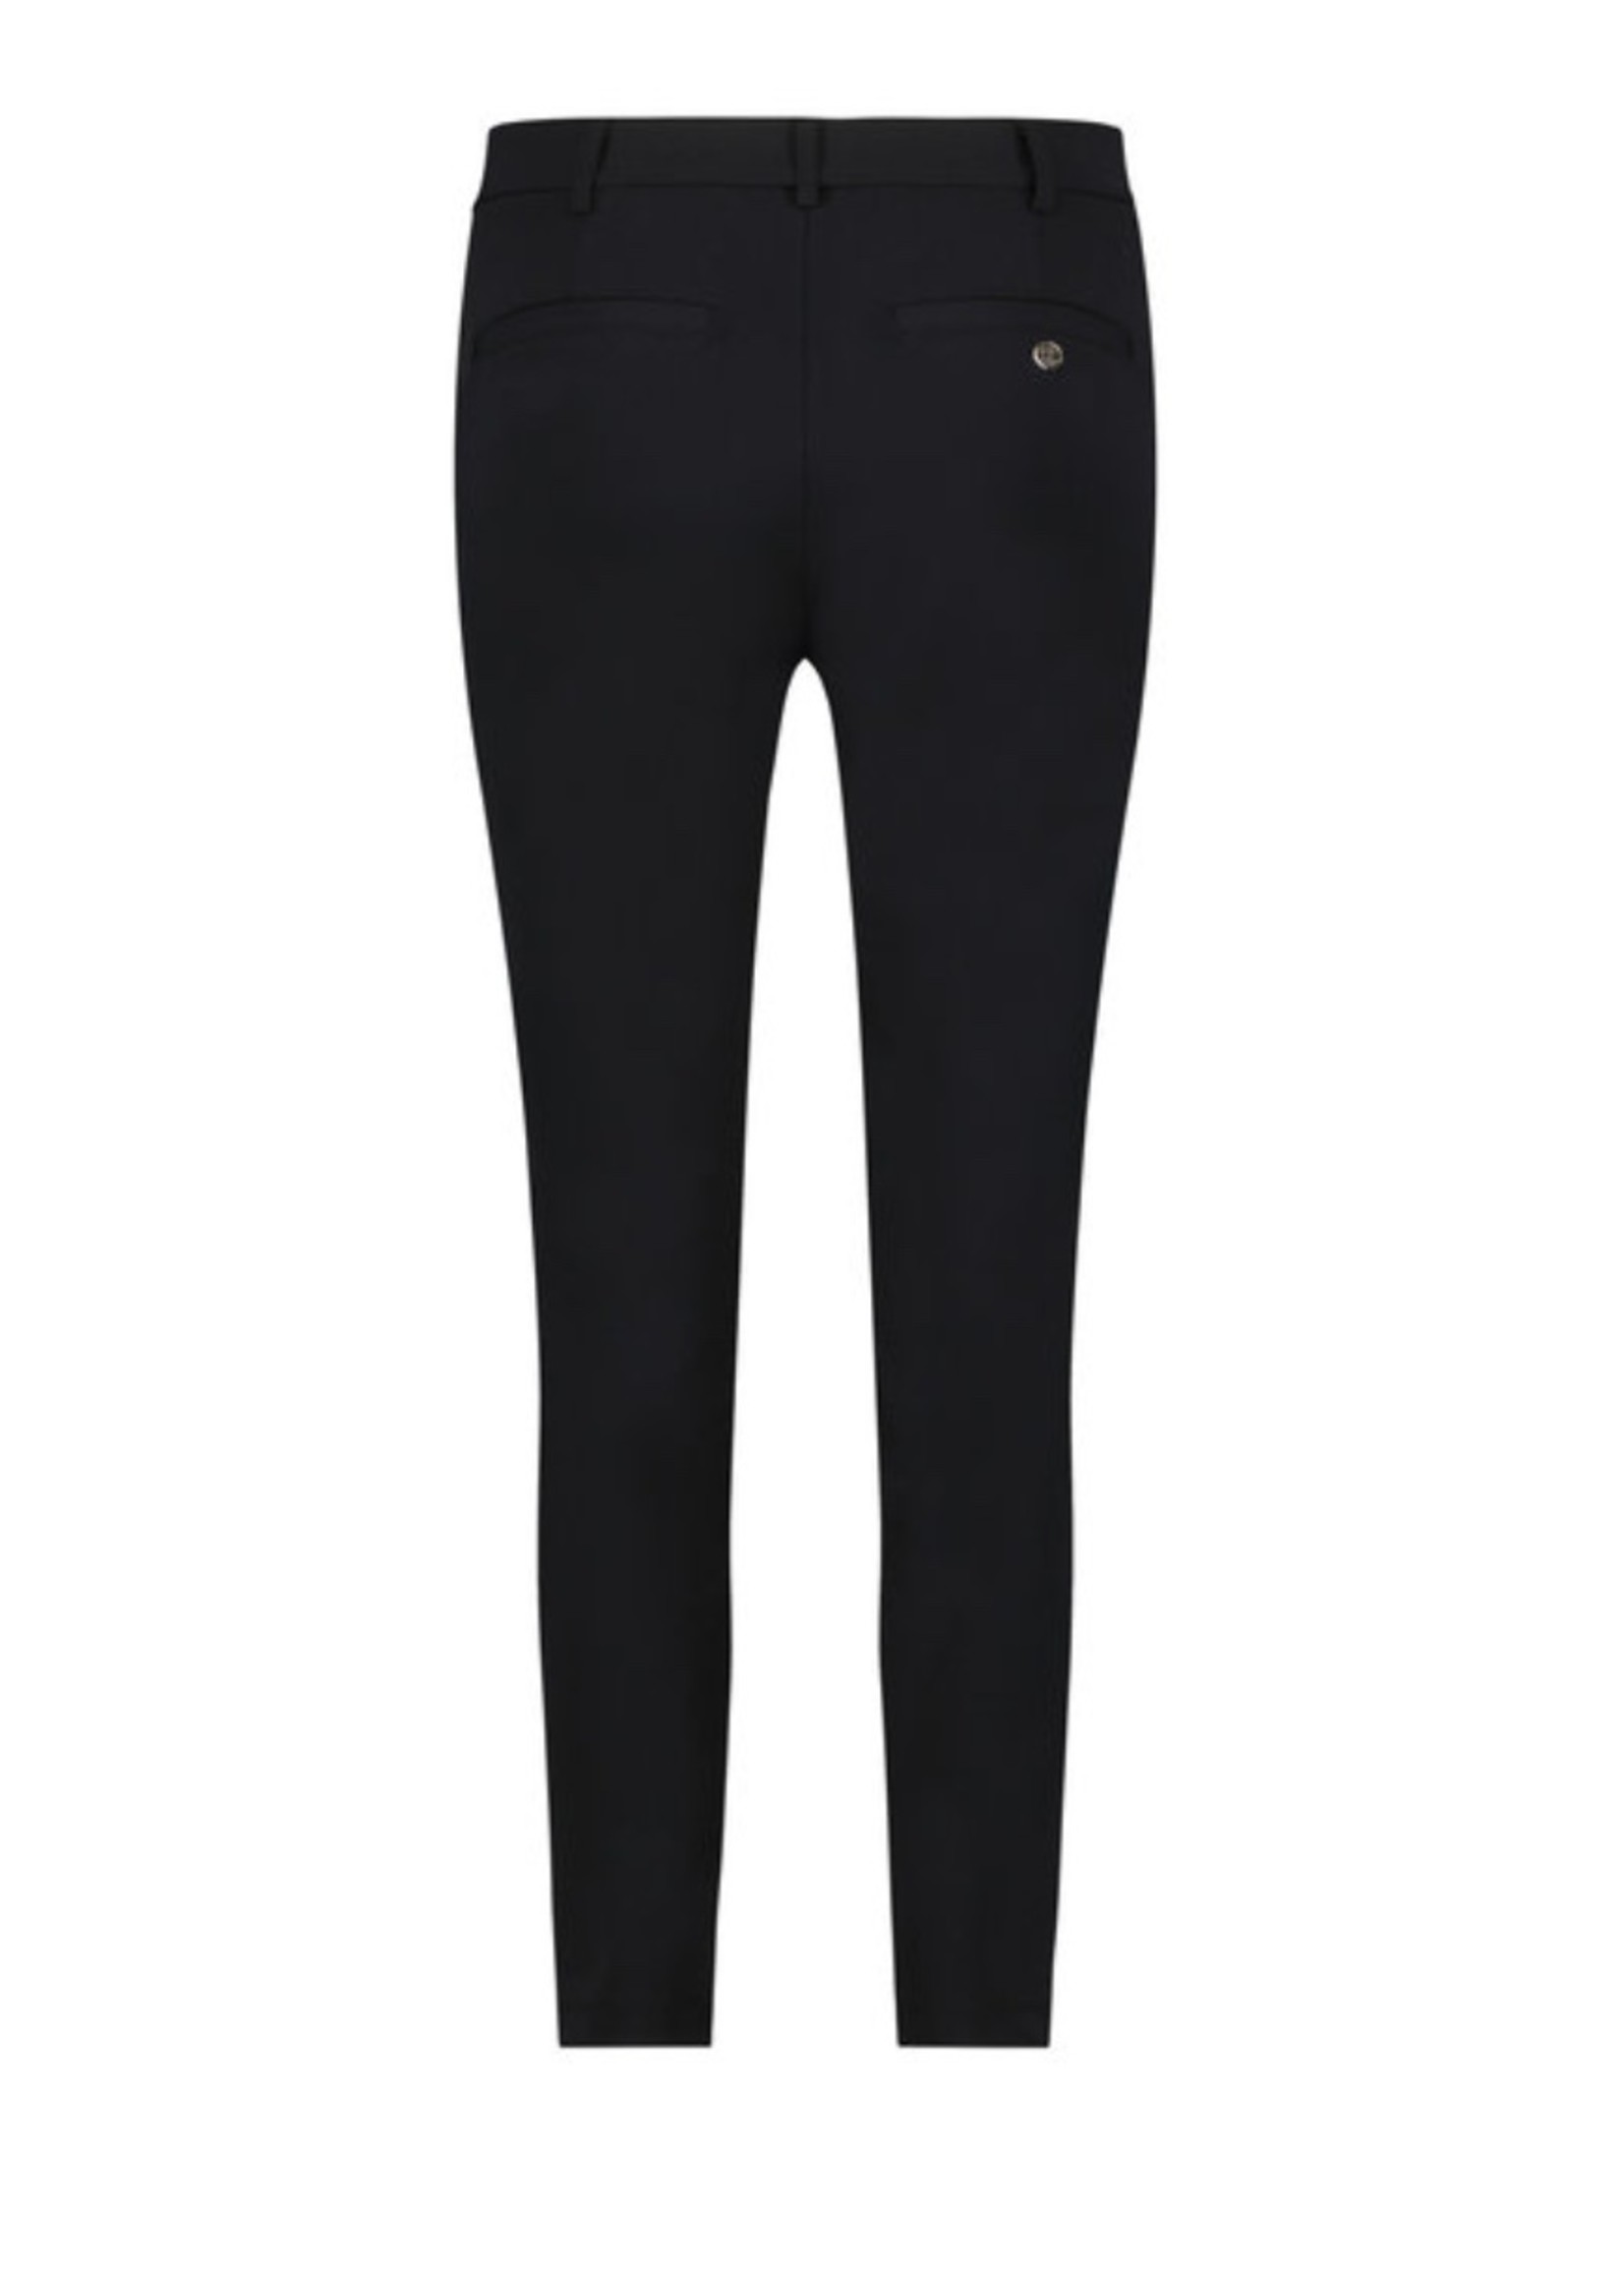 Lady Day Chino - M08.475.8029 - Trouser